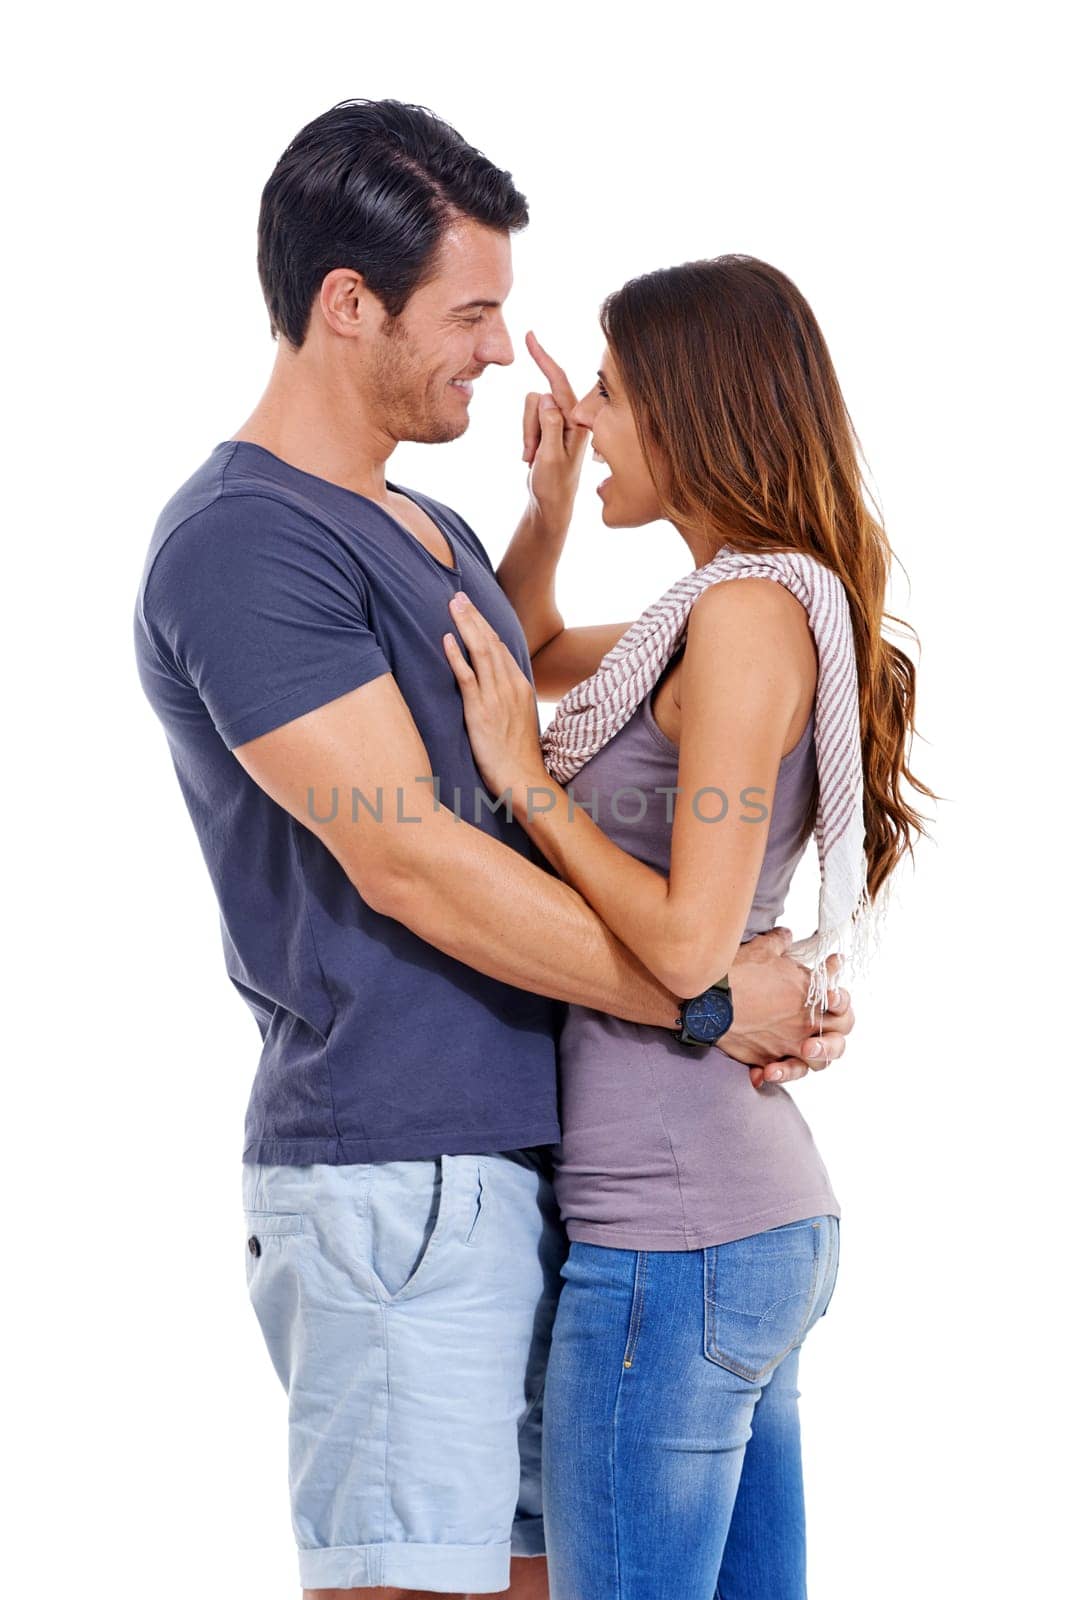 Flirt, conversation and couple with love, romance and happiness isolated on a white studio background. Marriage, man and woman with hug and relationship with commitment, playing and bonding together.